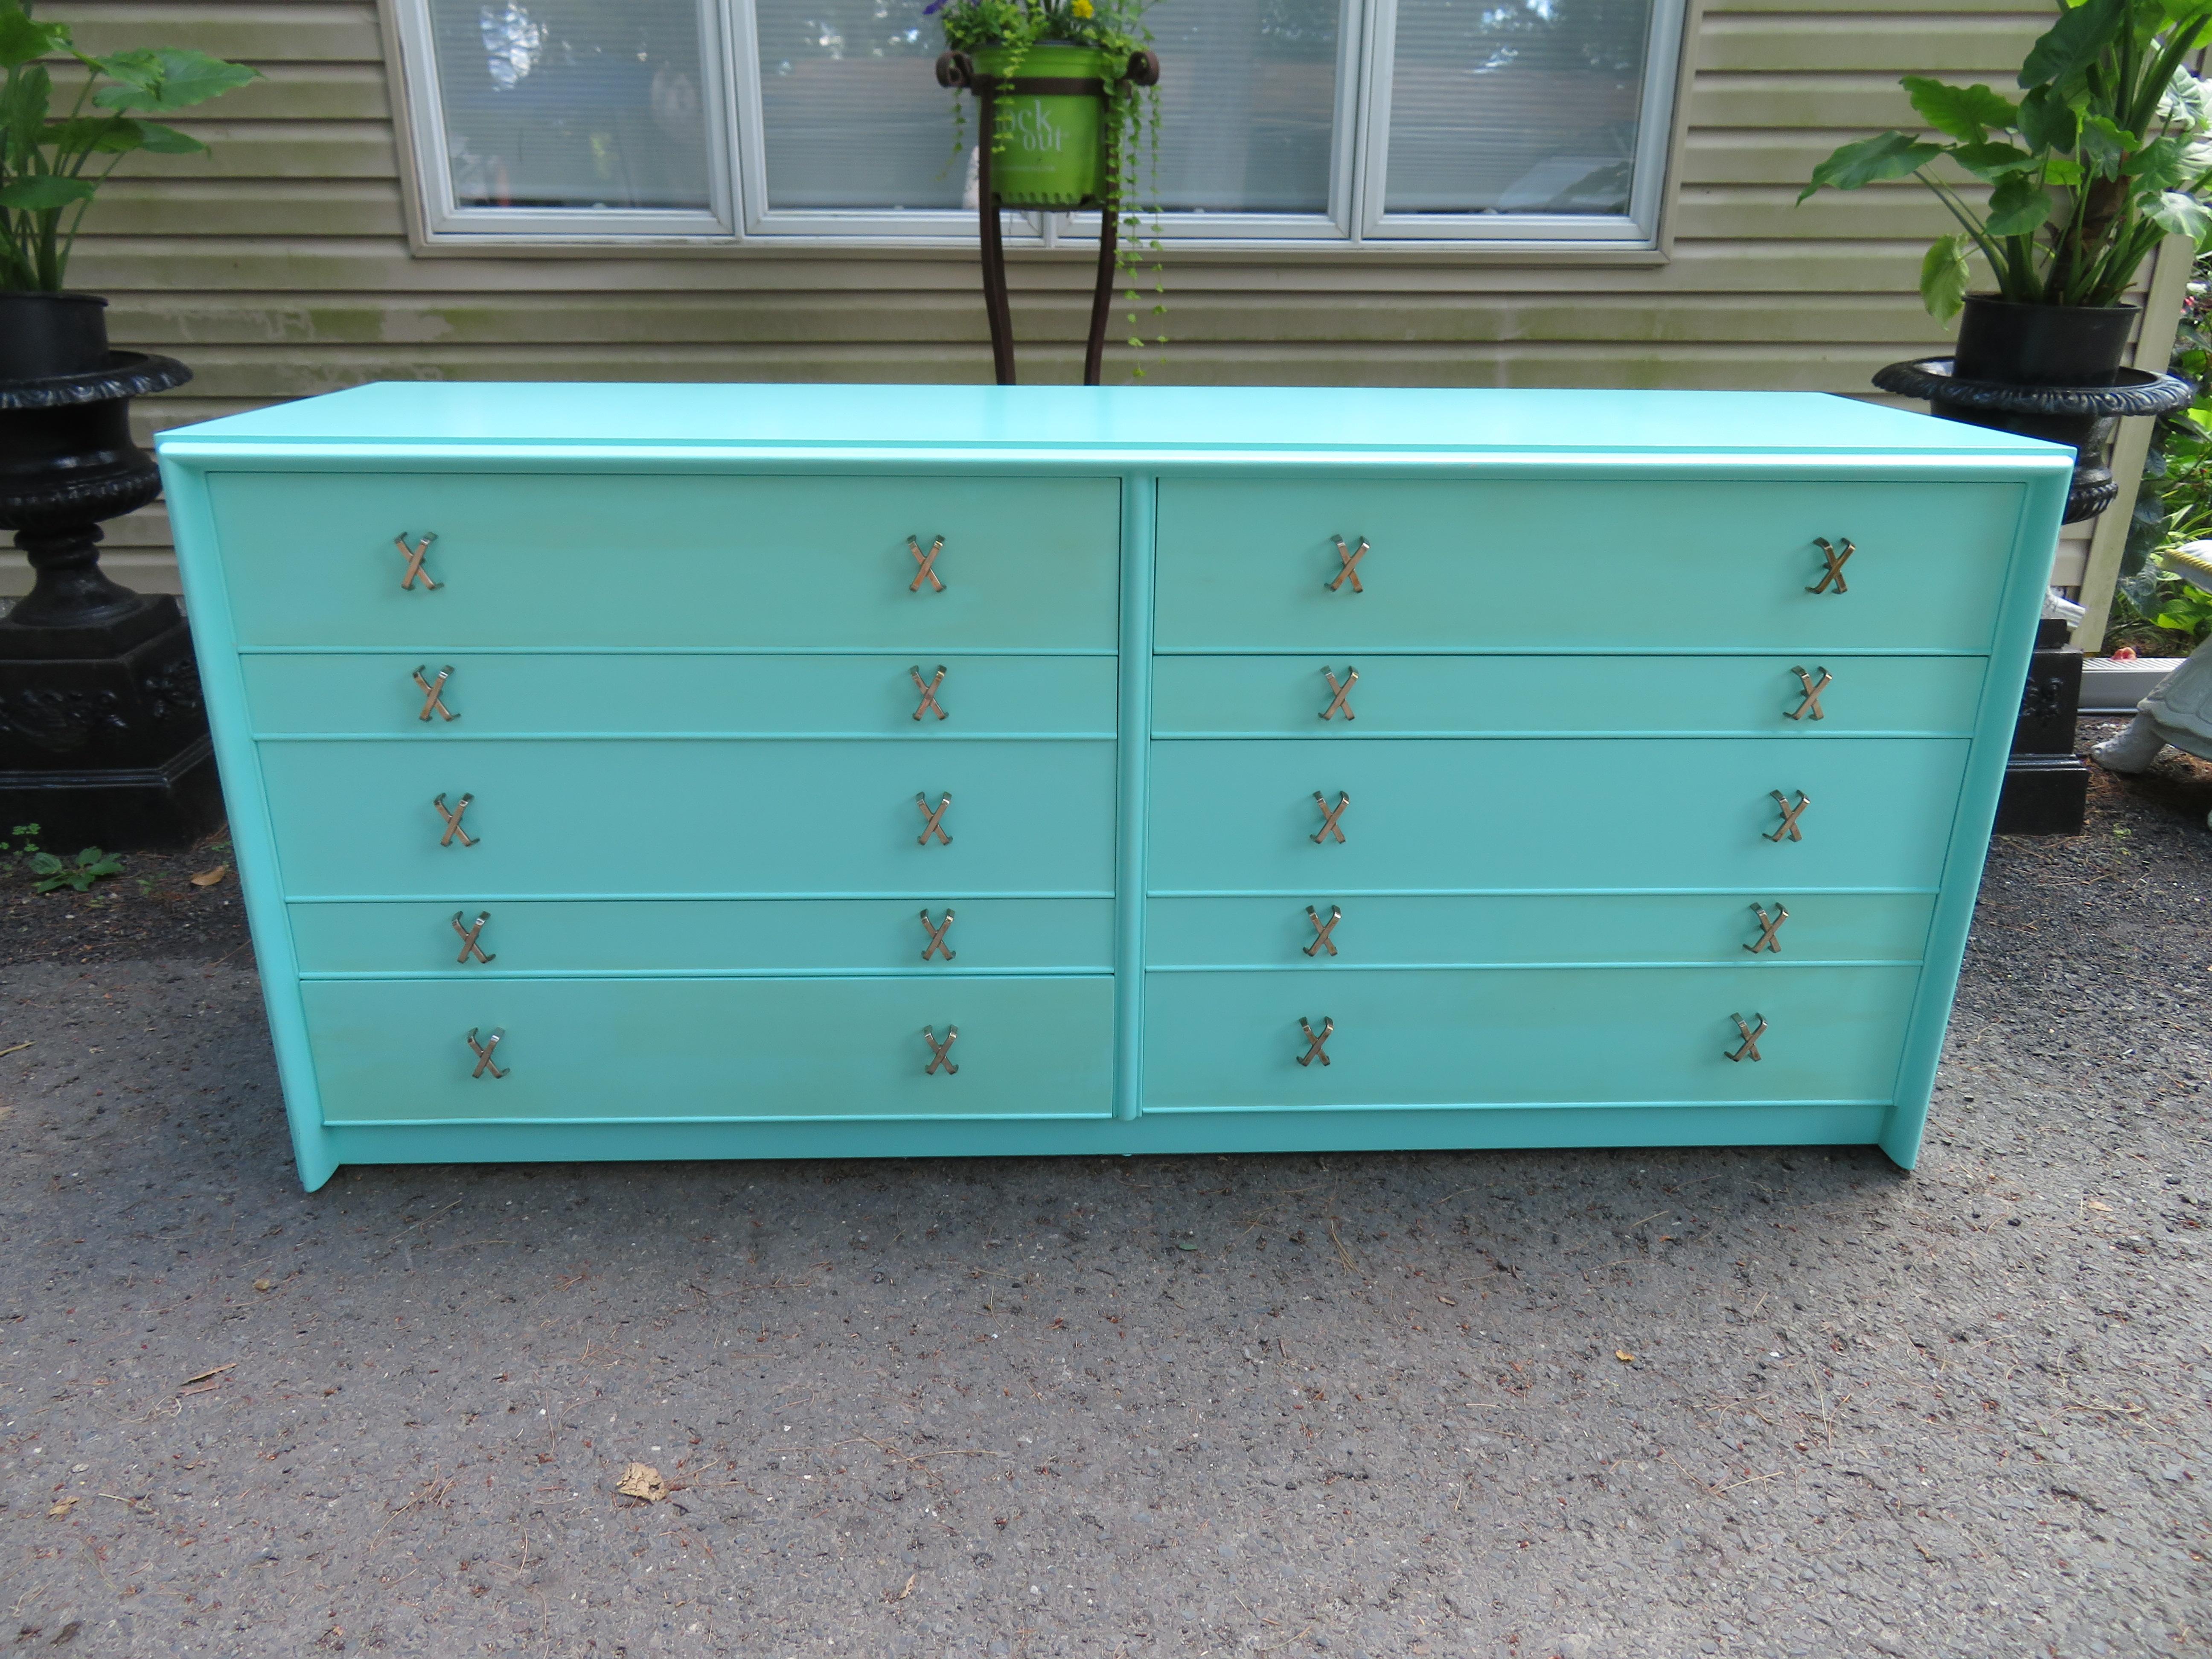 Fantastic Tiffany box blue Paul Frankl X-pull dresser credenza. This piece was restored by the original owner about 10 years ago and still looks great. The said they had it professionally repainted with this Tiffany box blue color and is gorgeous in